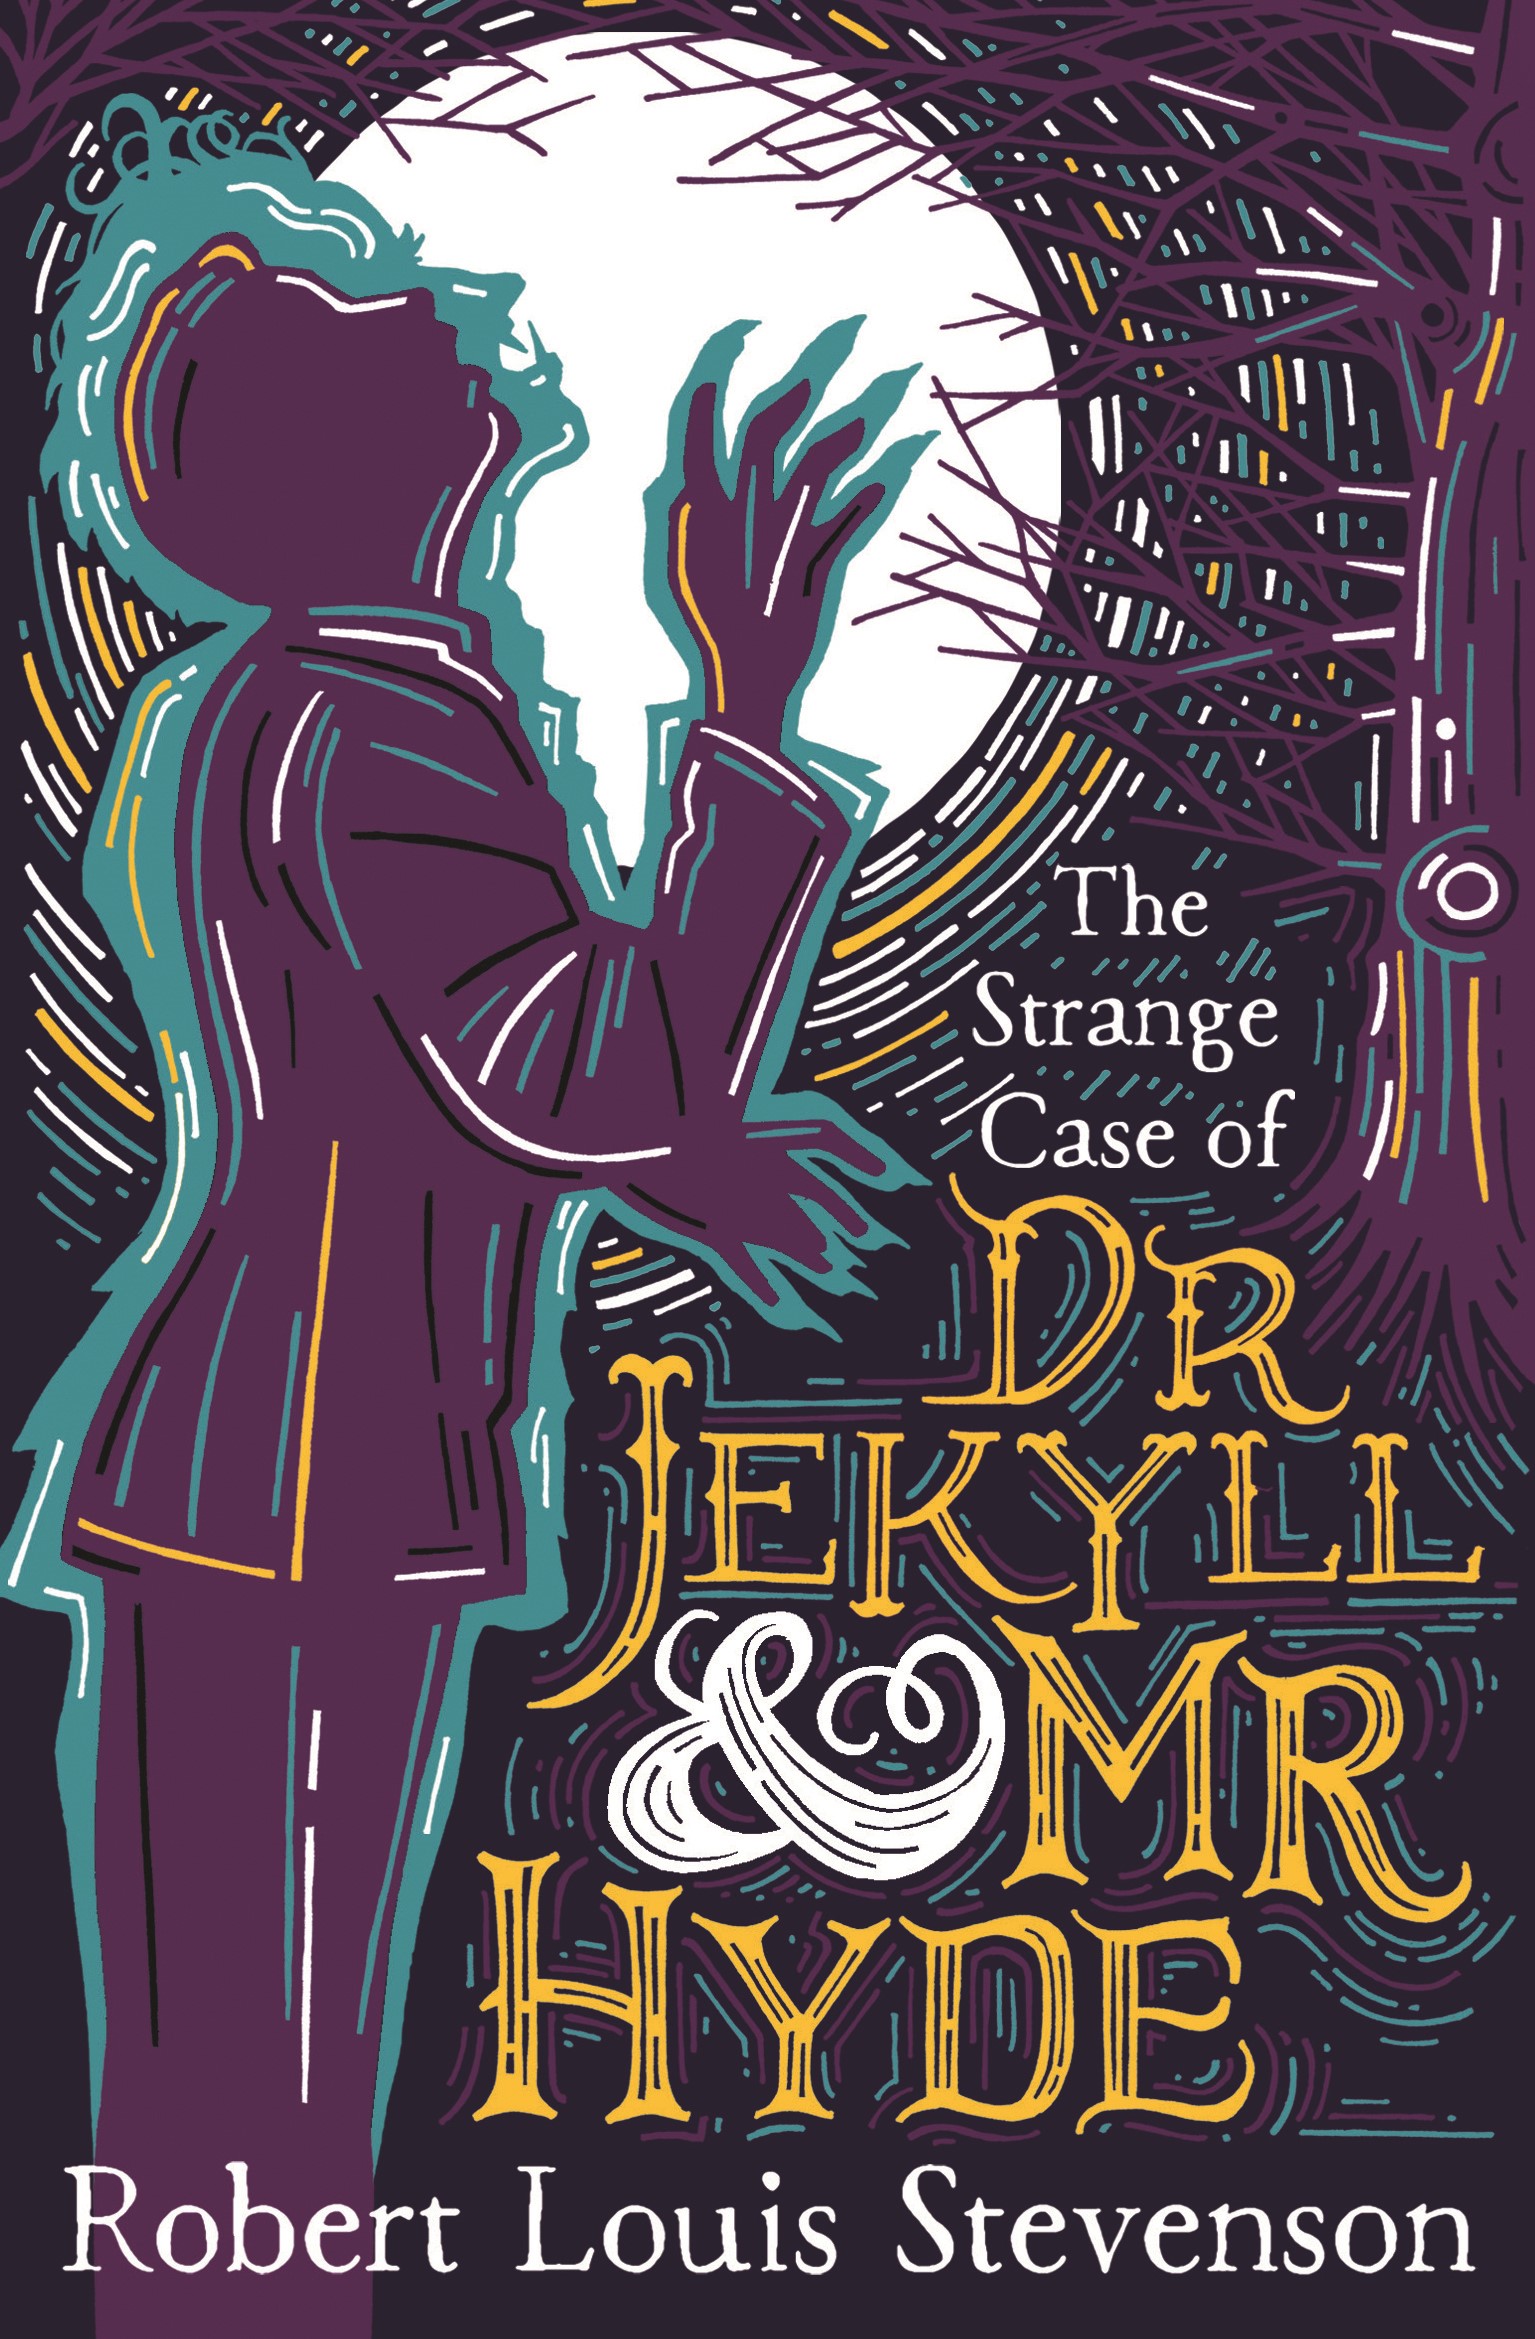 Book talk: The Mr. Hyde in all of us